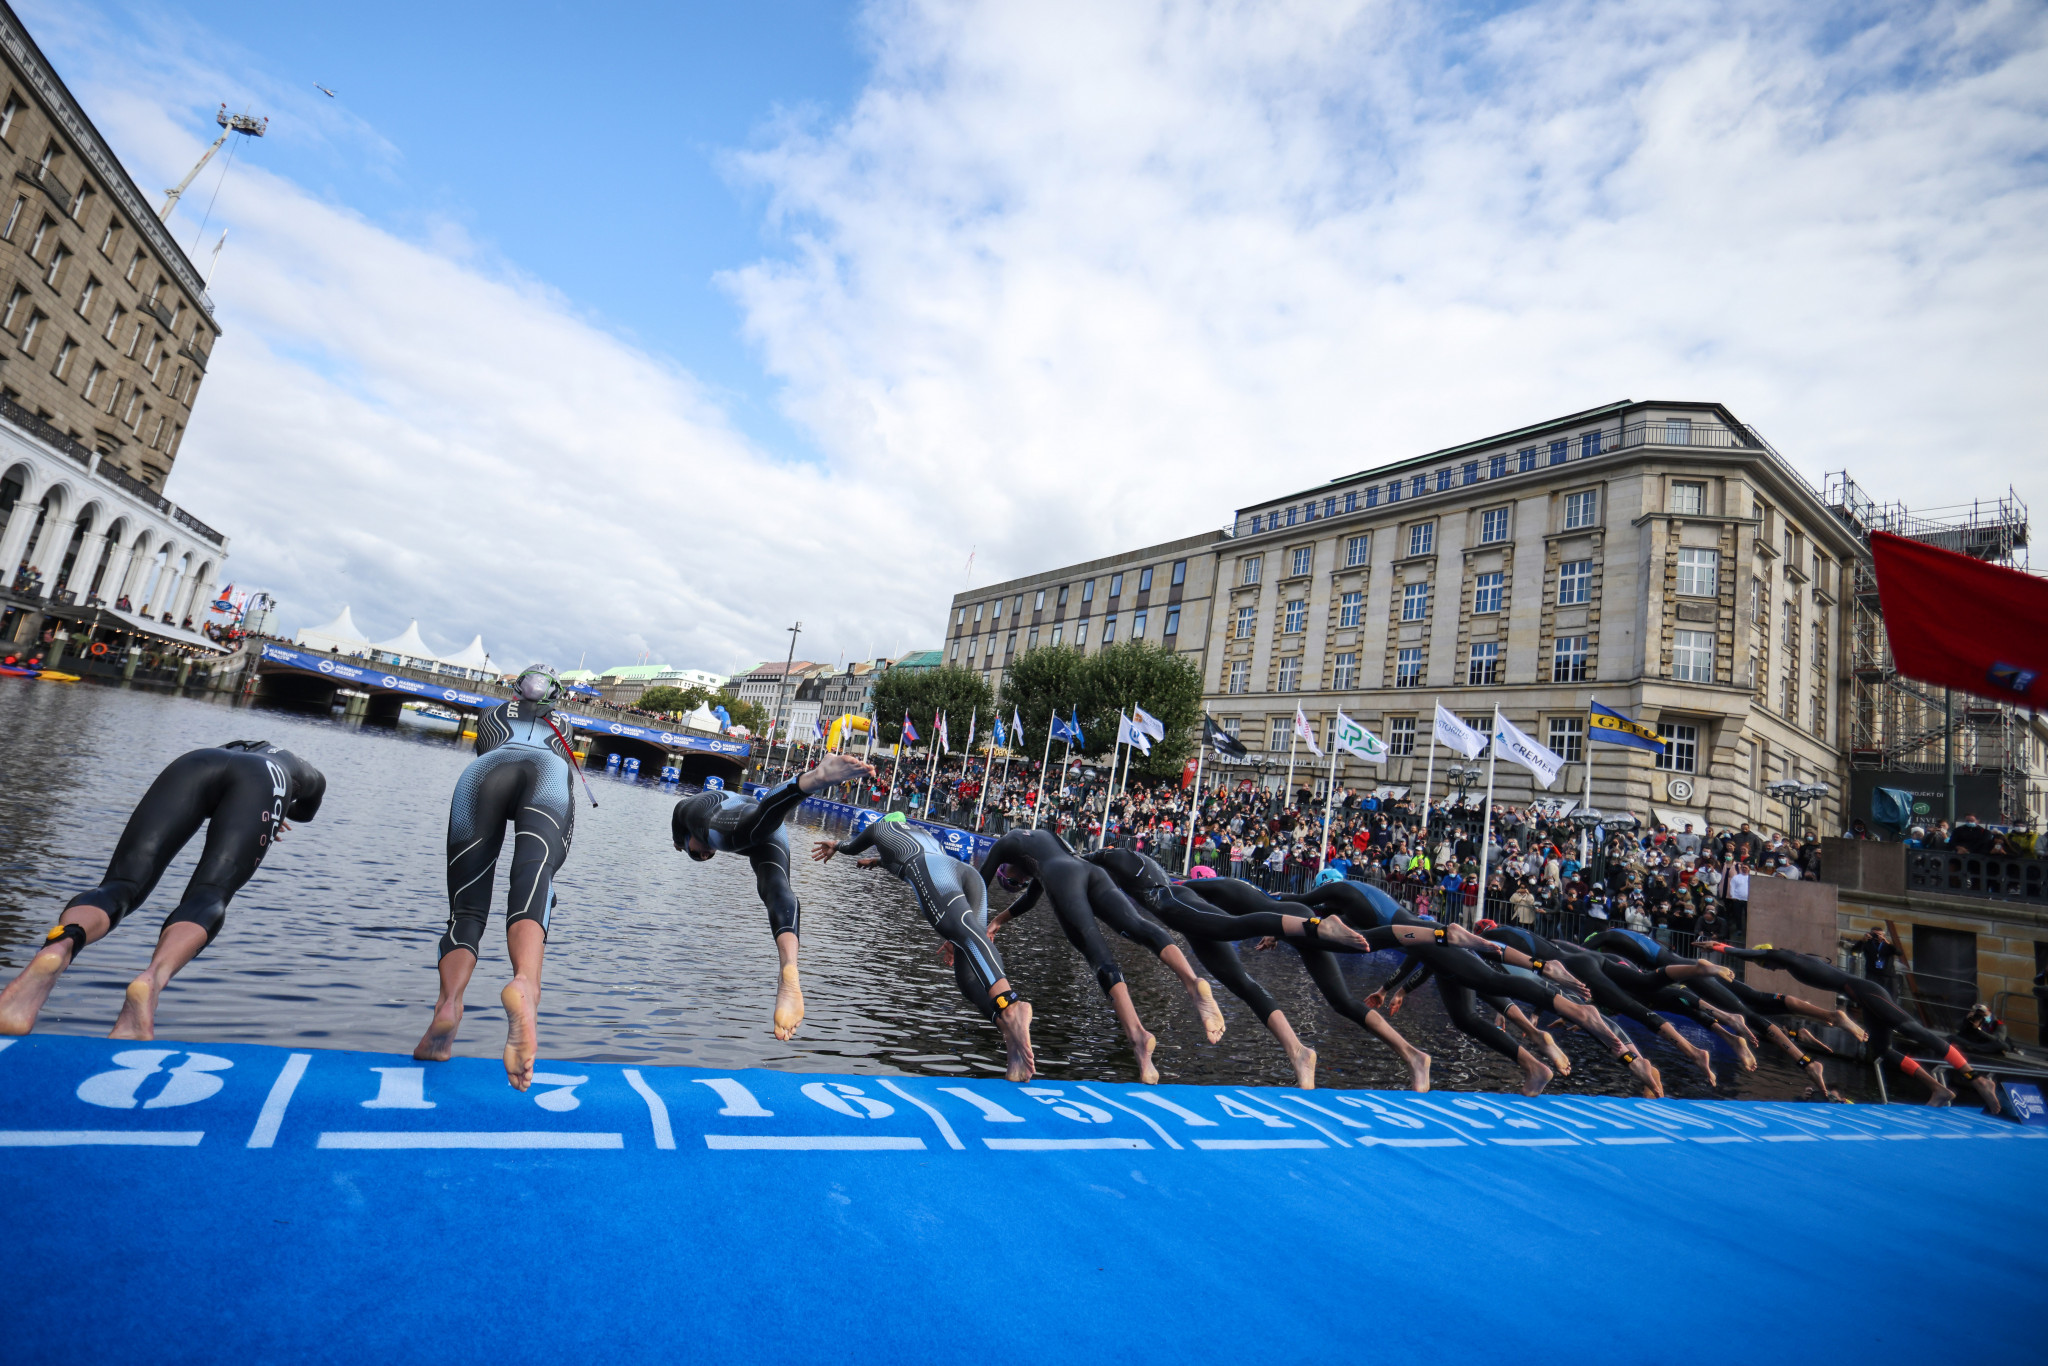 Dates announced for 2023 World Triathlon Sprint and Relay Championships in Hamburg